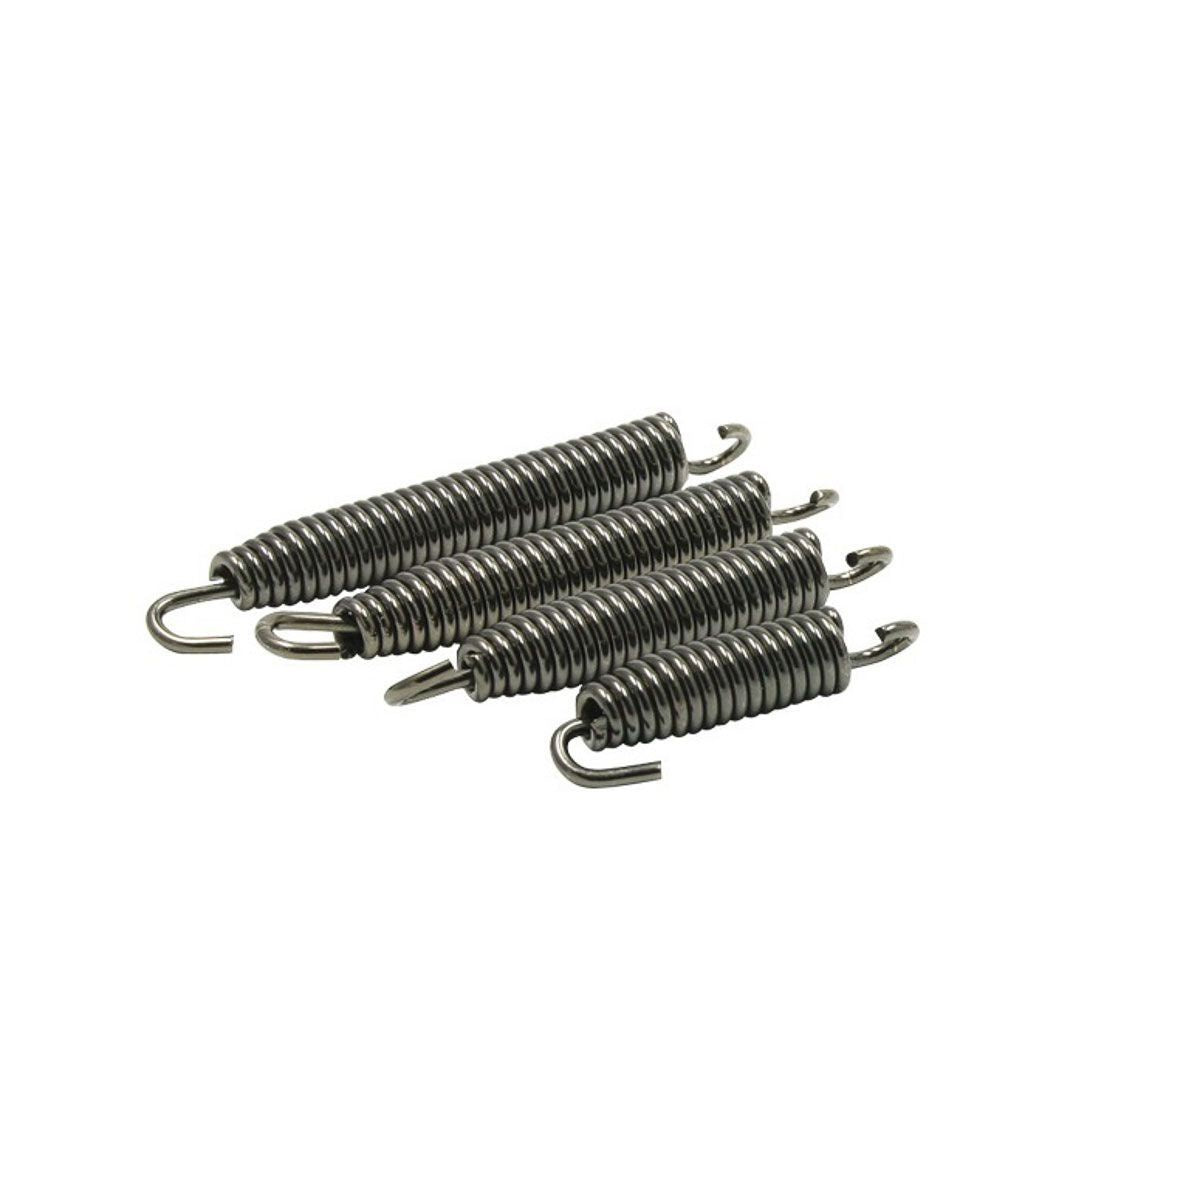 Kartech Exhaust Spring With Swivel Ends 65mm Suit KA